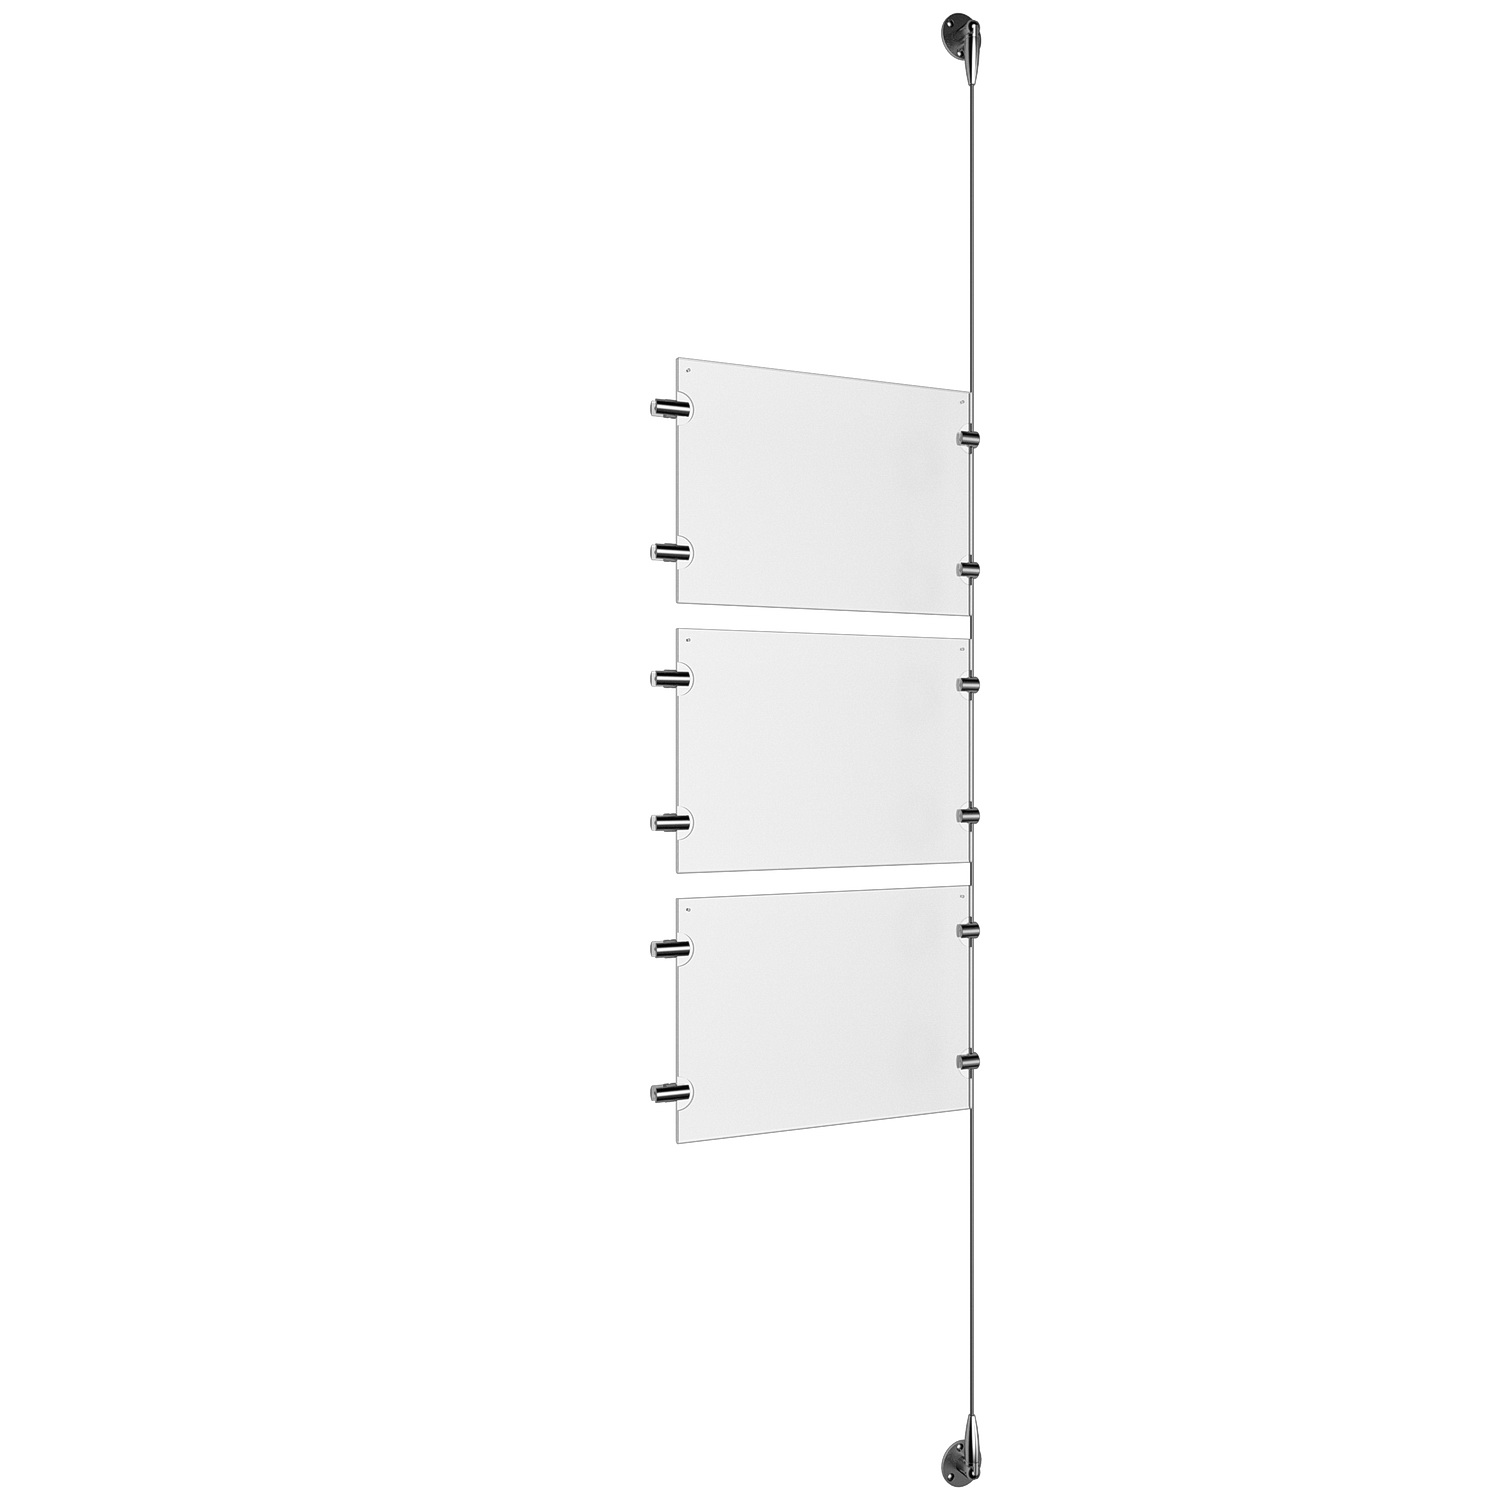 (3) 11'' Width x 8-1/2'' Height Clear Acrylic Frame & (1) Stainless Steel Satin Brushed Adjustable Angle Signature 1/8'' Cable Systems with (6) Single-Sided Panel Grippers (6) Double-Sided Panel Grippers